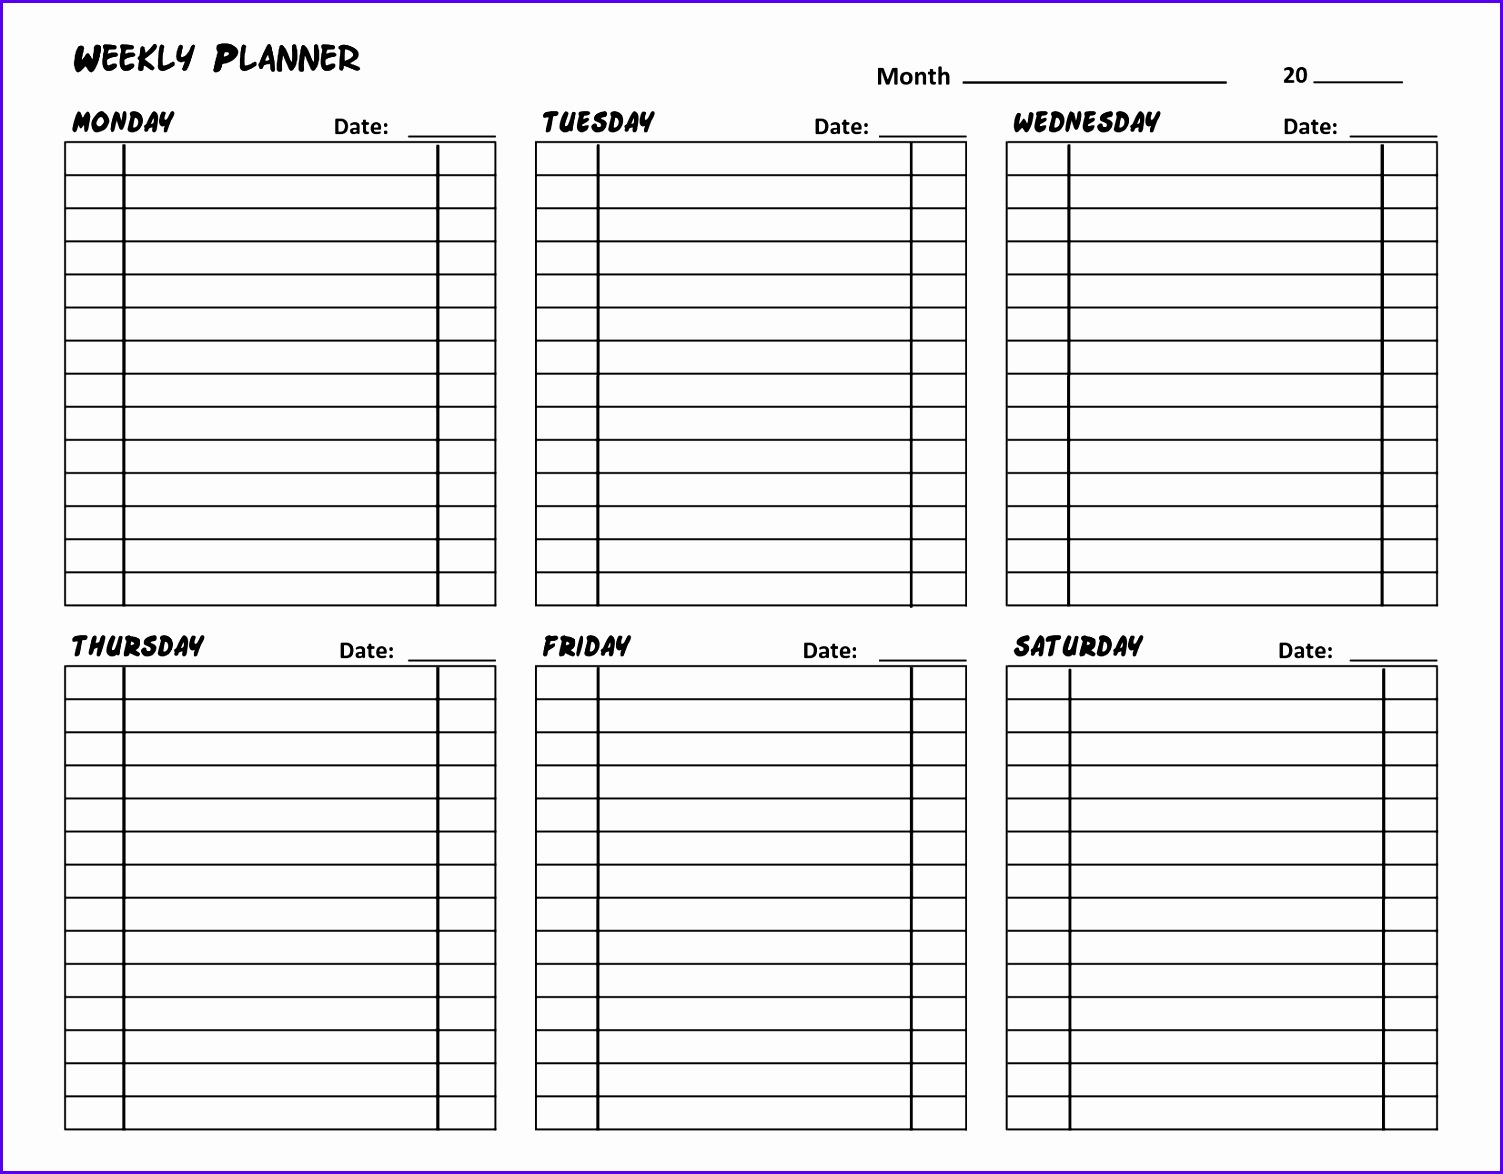 Weekly Planner Template Excelnthly Dinner Planner Template